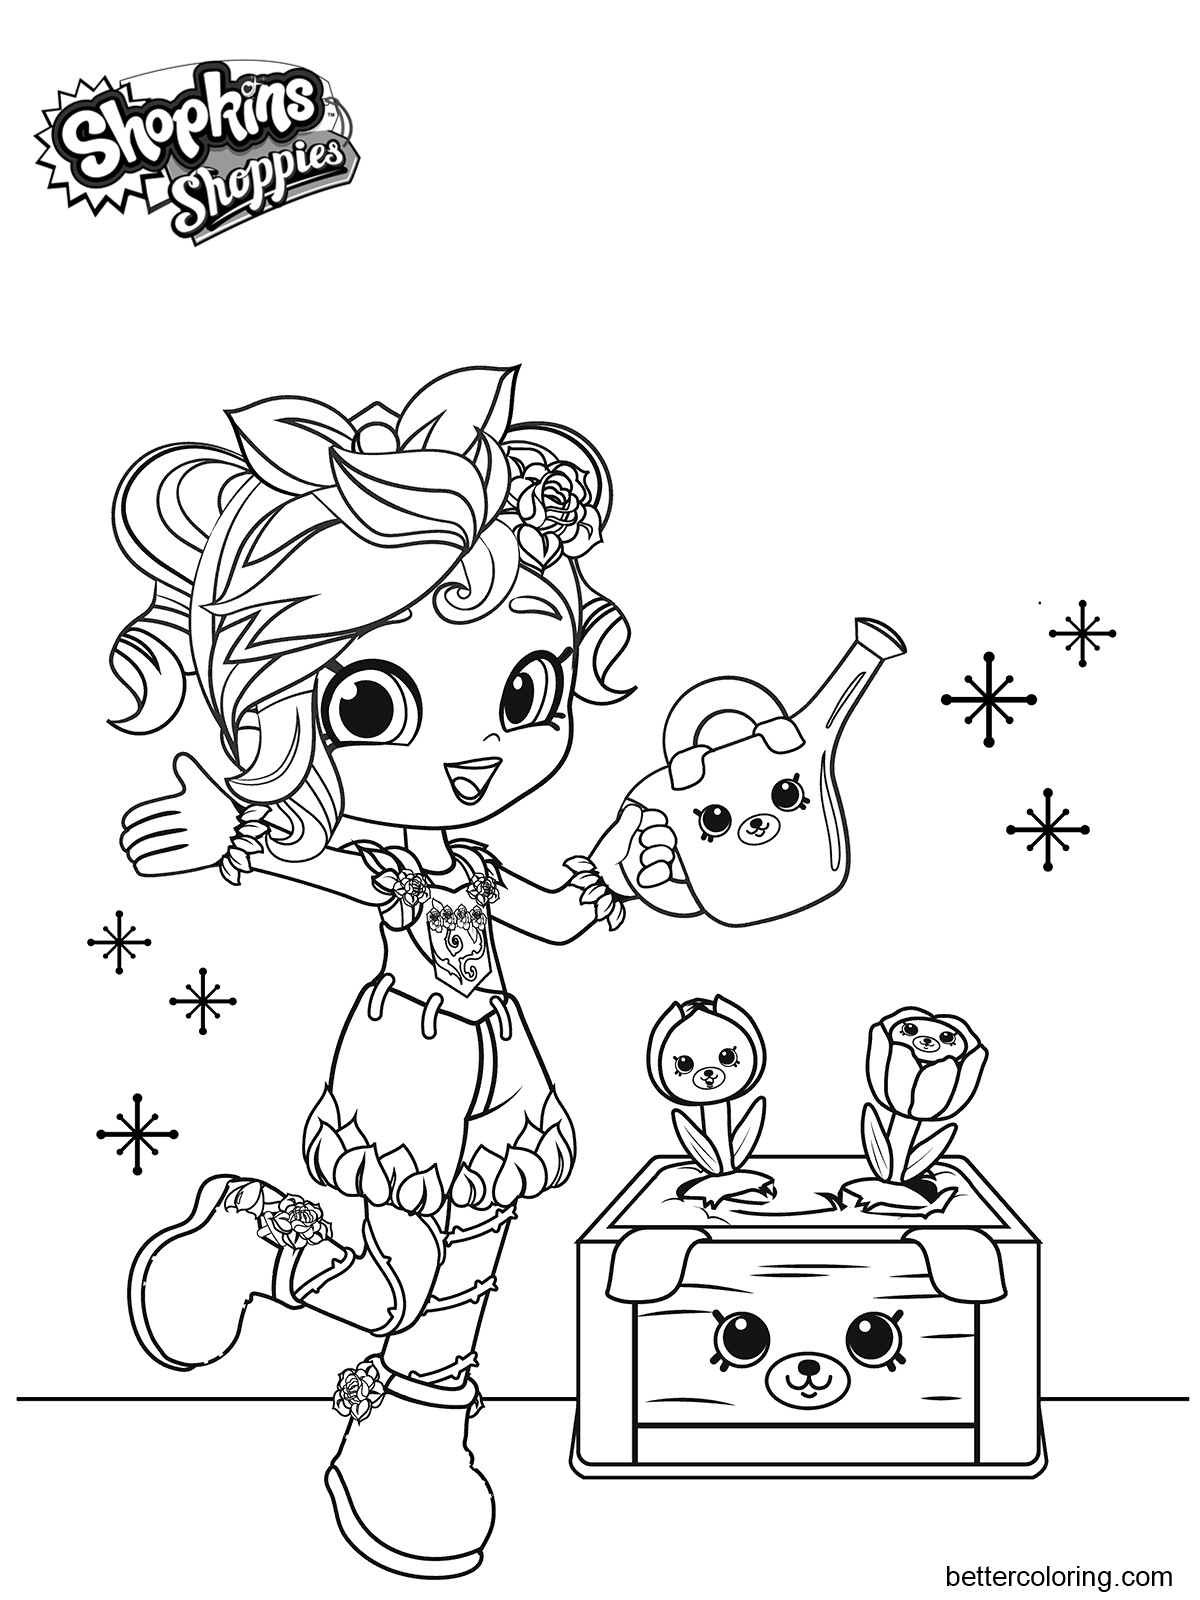 Girly Coloring Pages Printable
 Girly Shoppies Coloring Pages Free Printable Coloring Pages